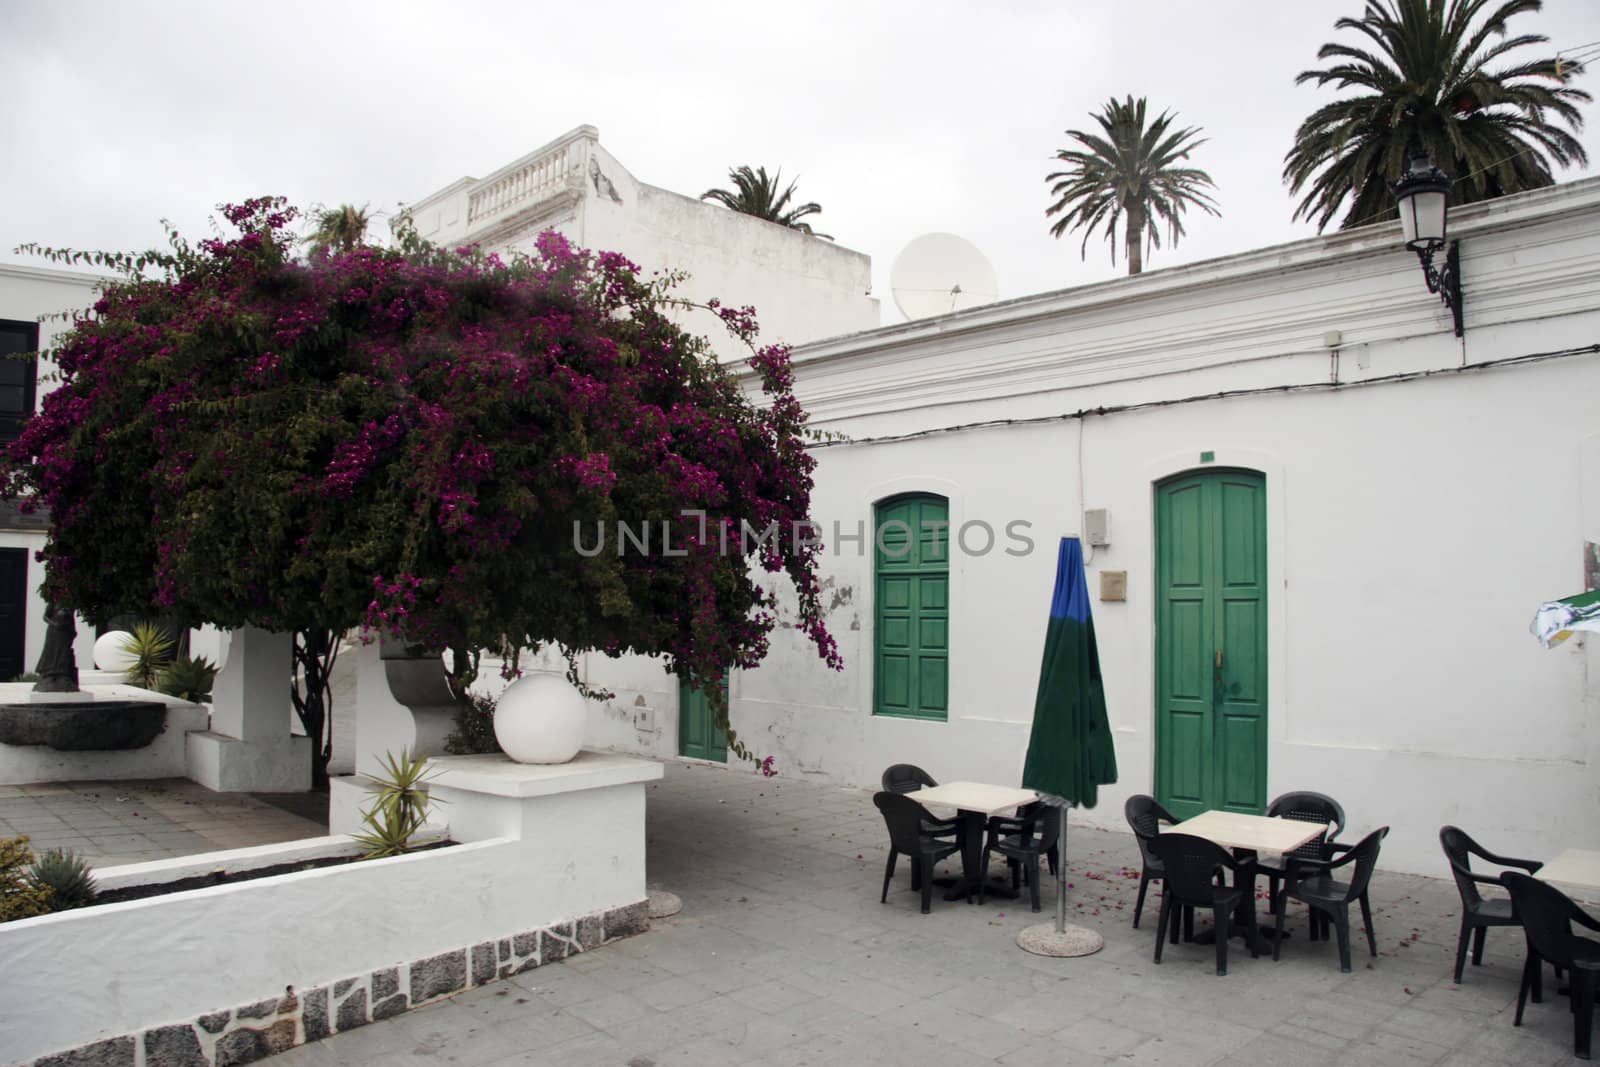 a court yard in a lanzarote town